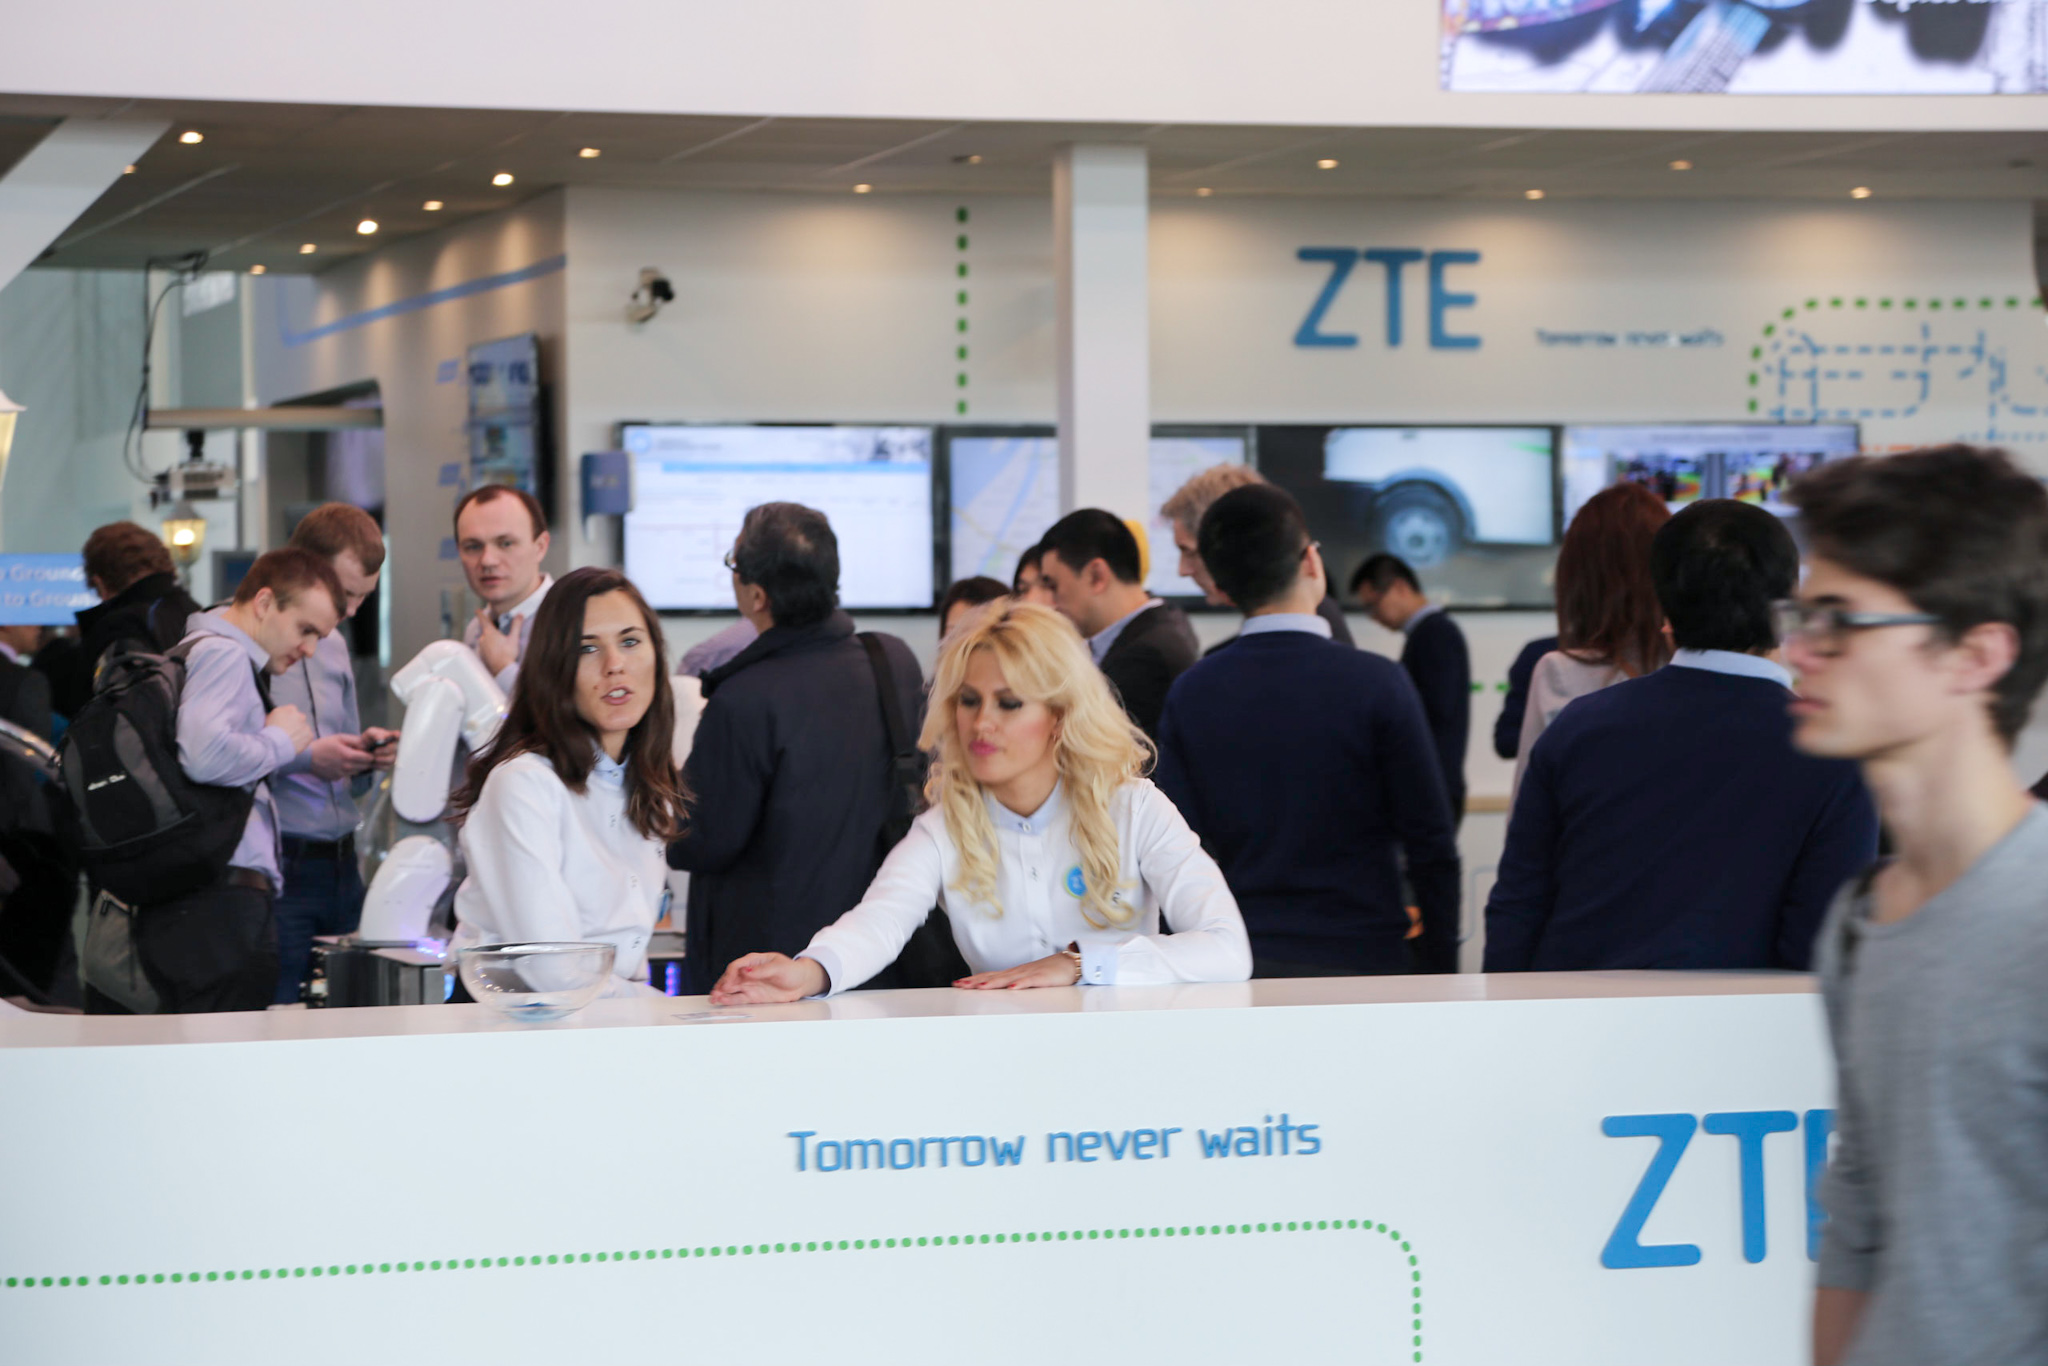 ZTE's slogan: Tomorrow never waits. Probably tomorrow will not come for ZTE